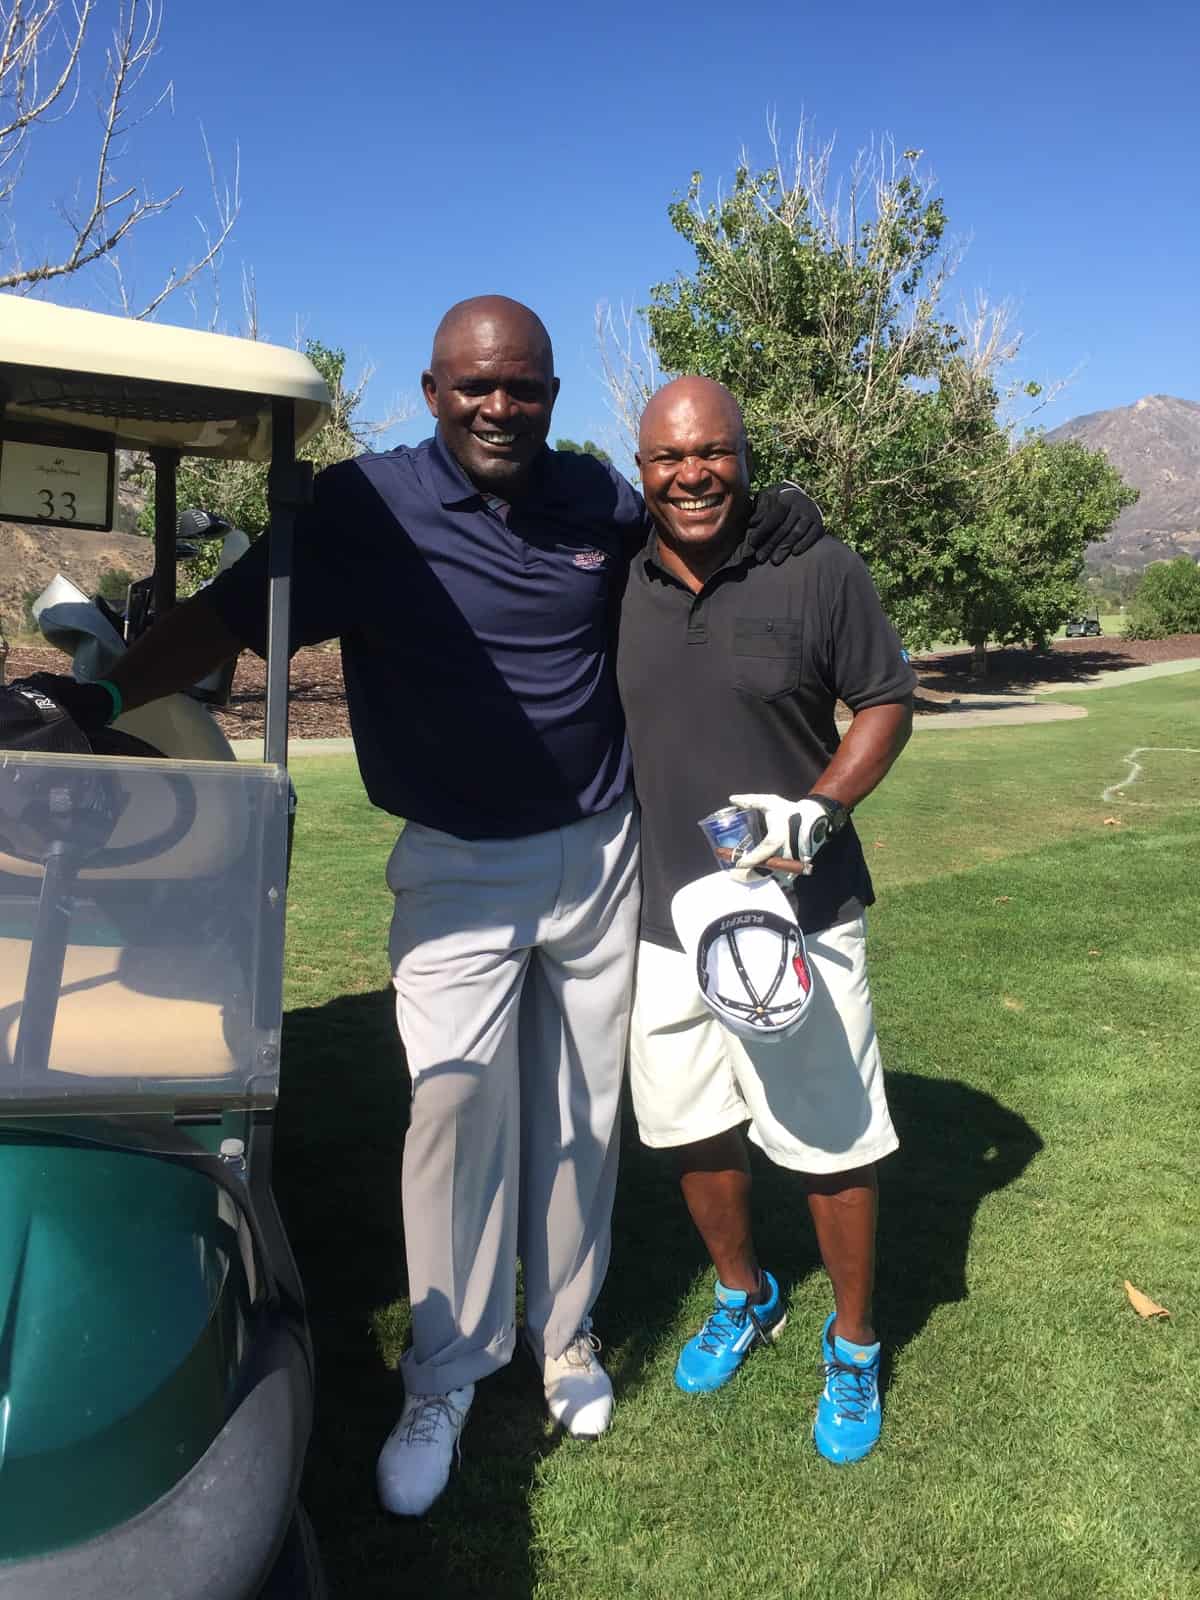 Pete Shaw and the legendary Lawrence Taylor